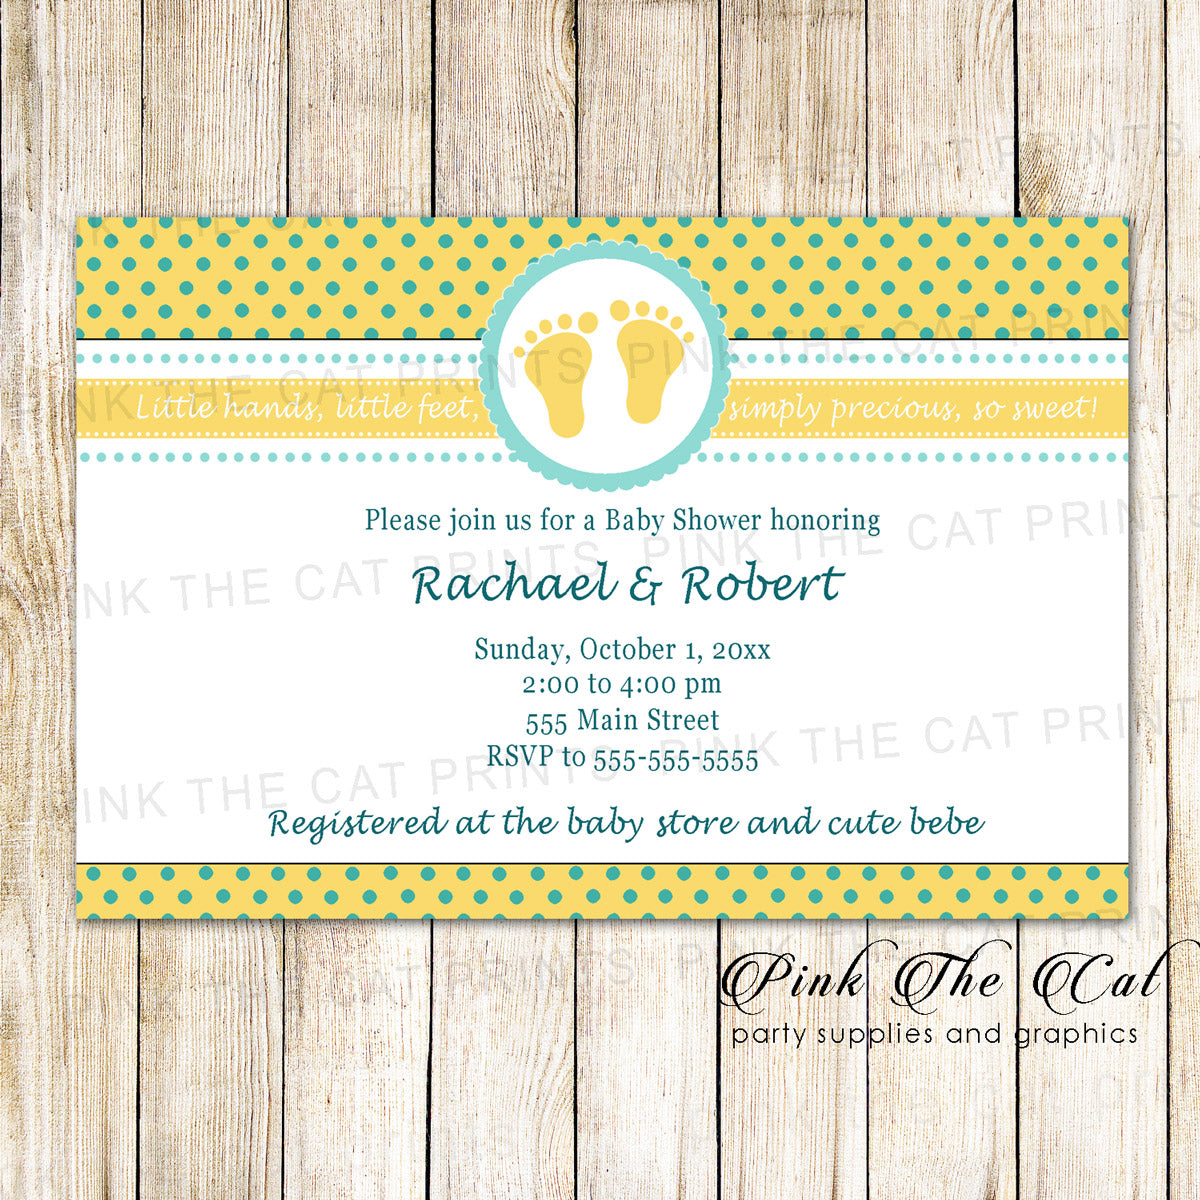 Footprints Invitation Baby Shower Turquoise Yellow printable